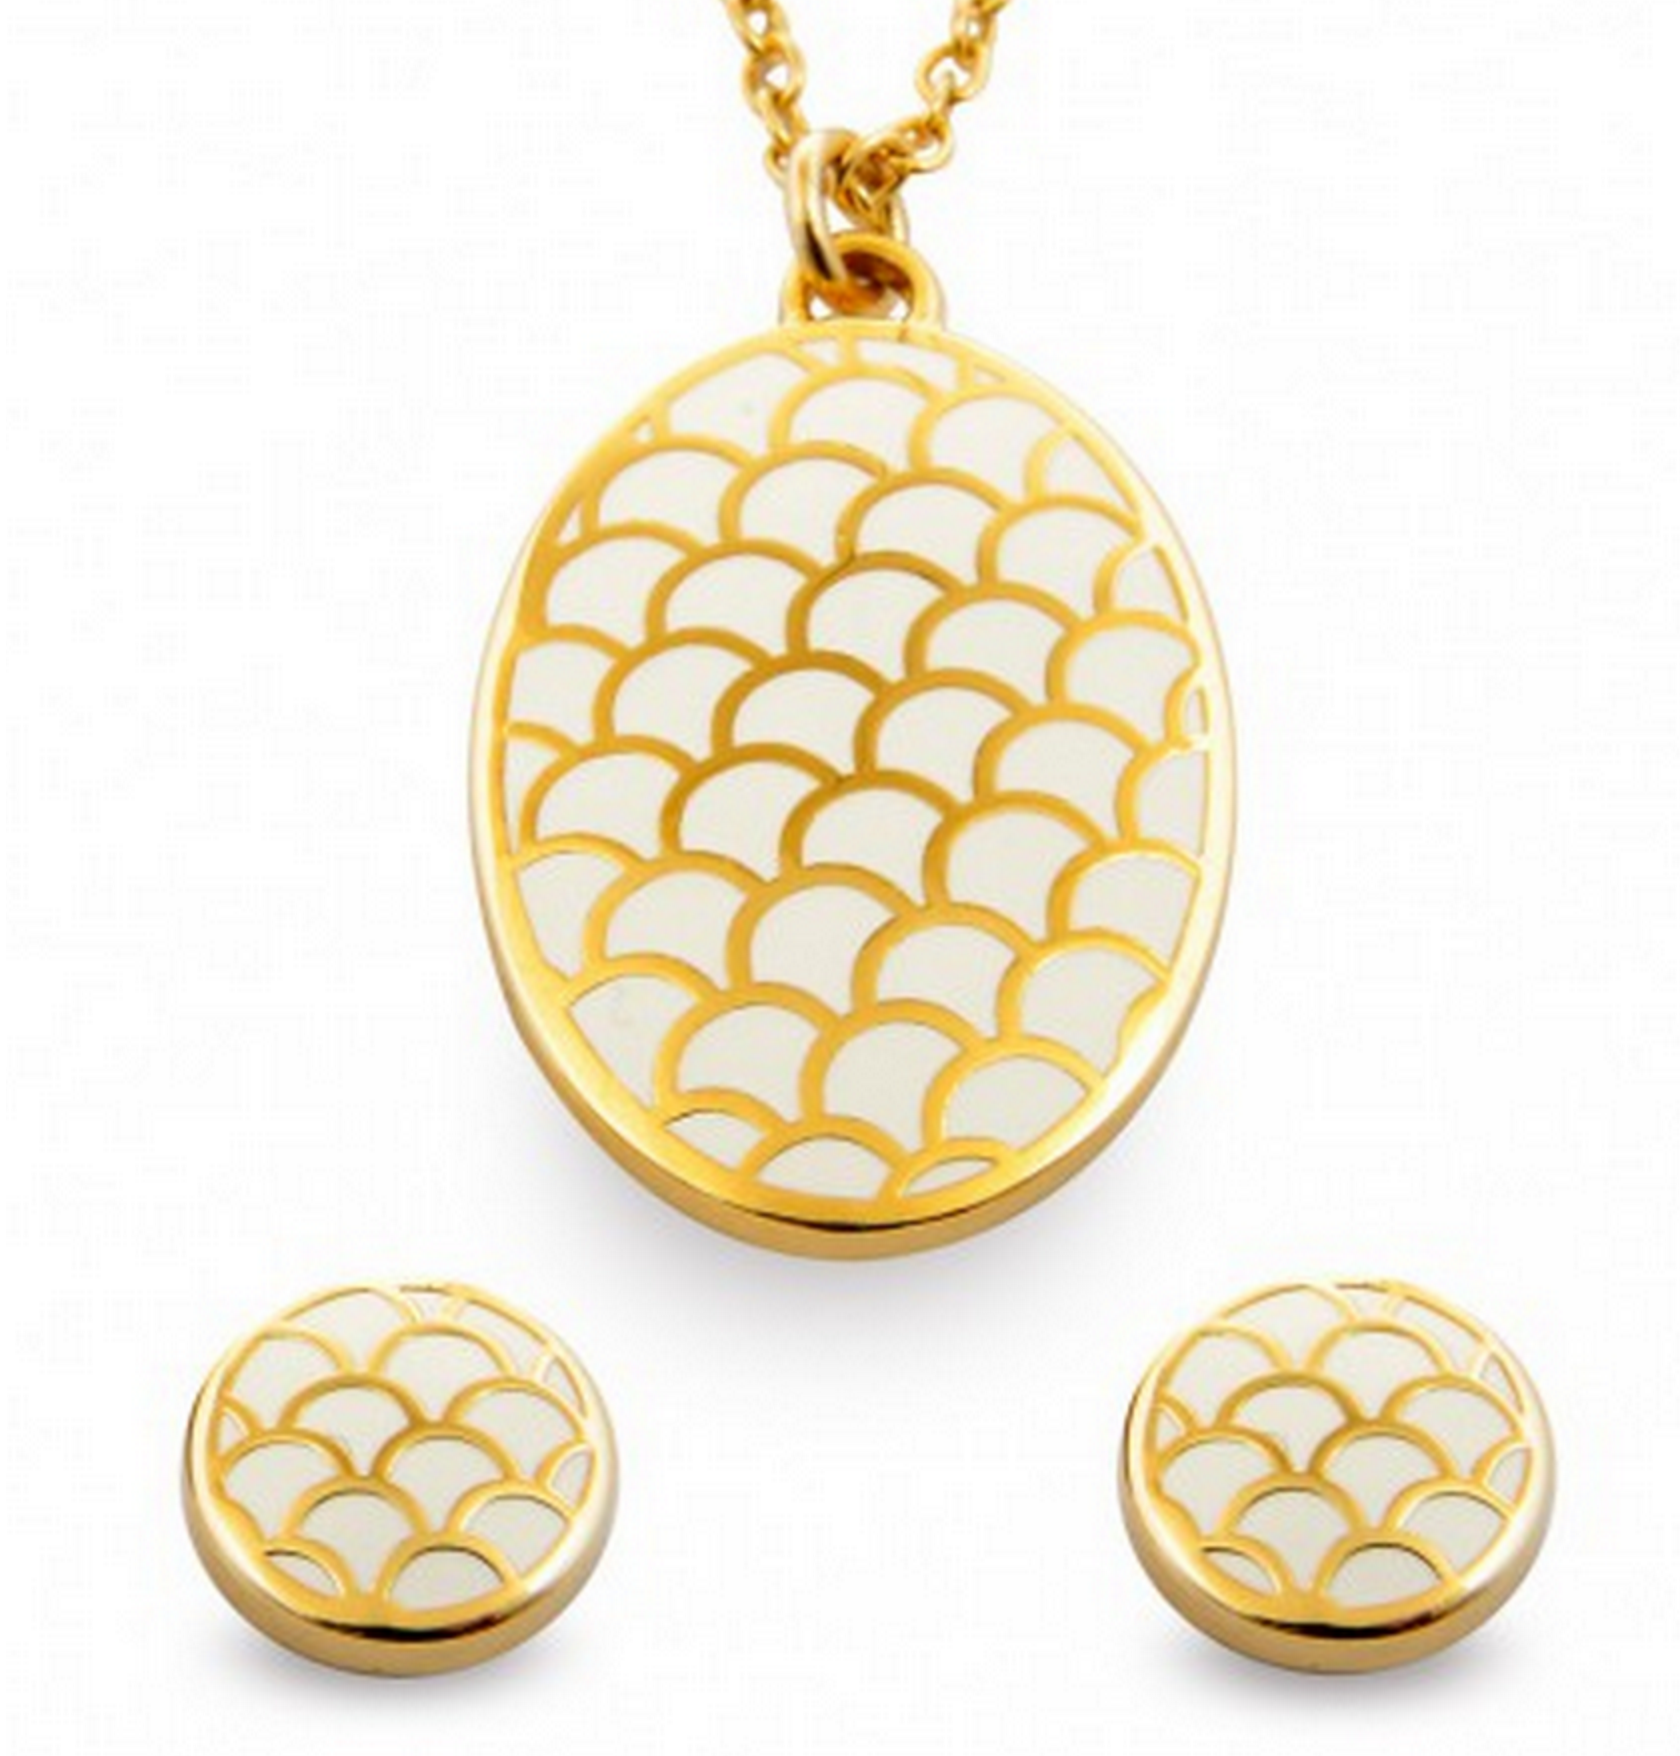 Halcyon Days Earring and Necklace Set in Salamander print